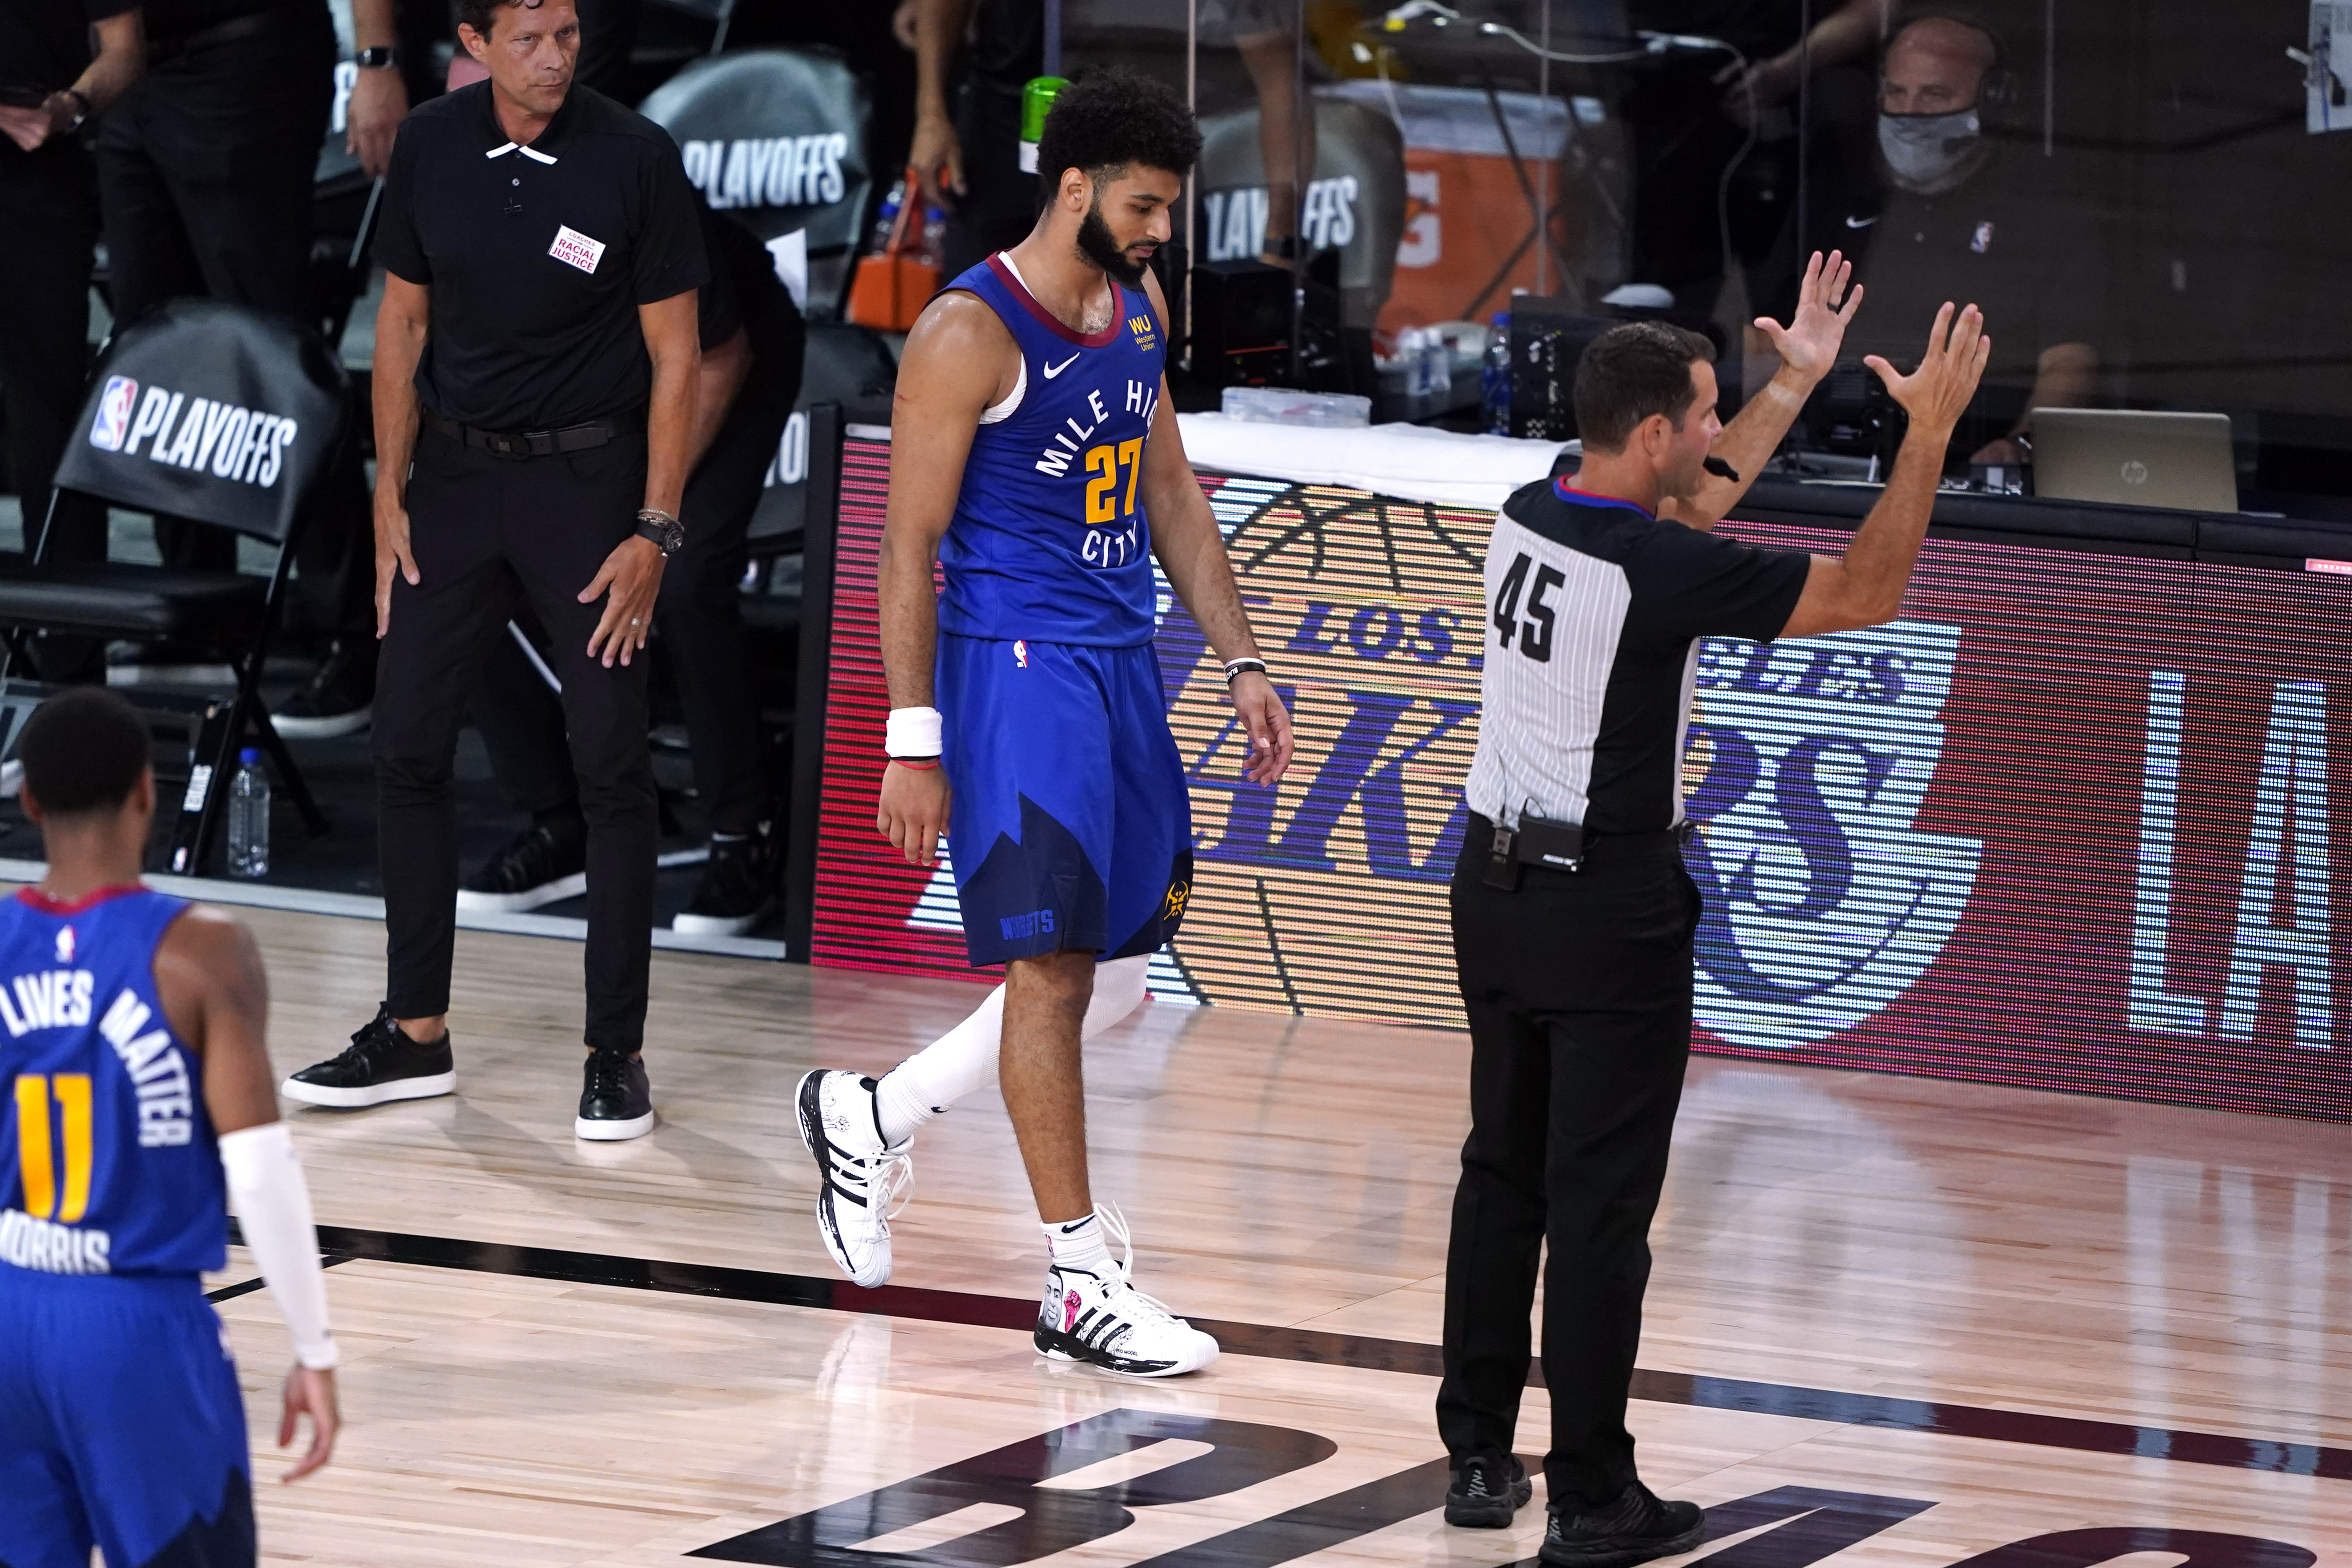 Denver Nuggets' Jamal Murray (27) walks back to the bench following game four of the first round of the 2020 NBA Playoffs at AdventHealth Arena